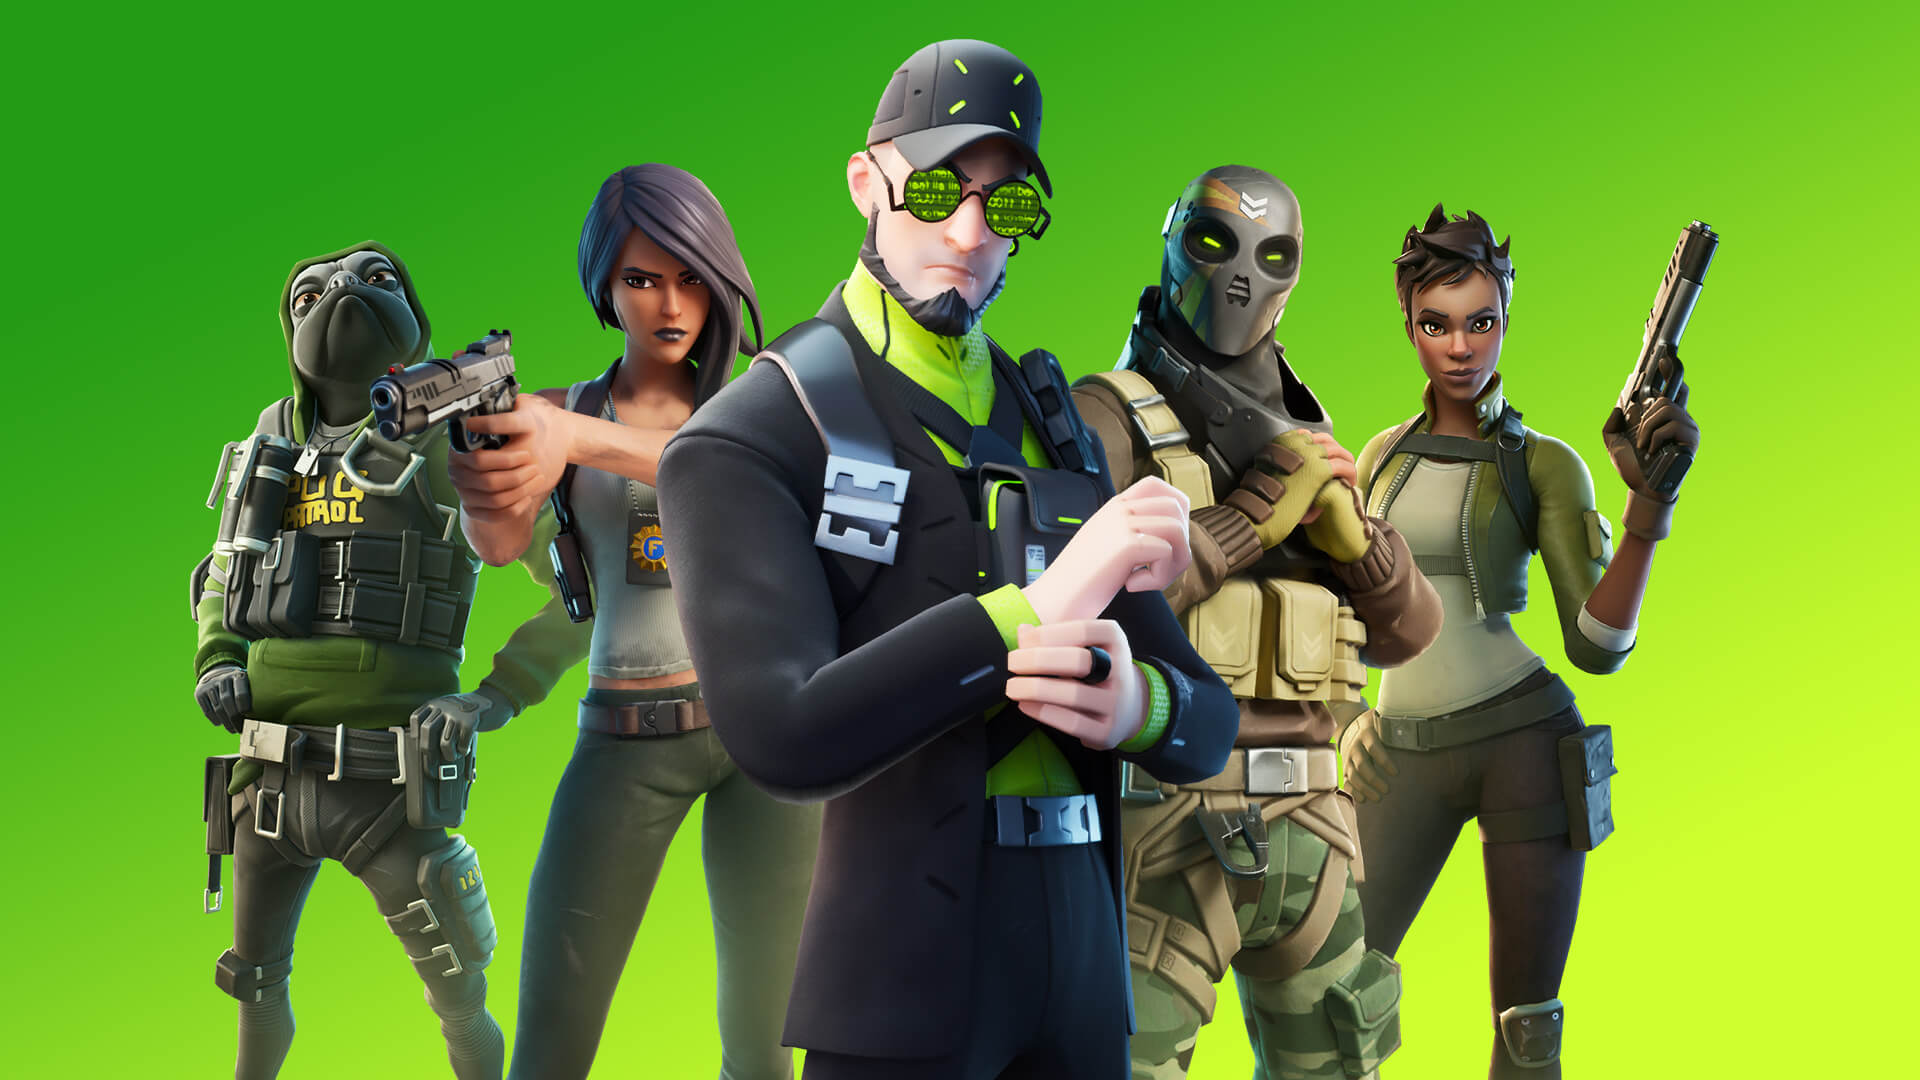 Image for Fortnite pulled off the Apple App Store and Google Play Store, Epic suing Apple and Google in response